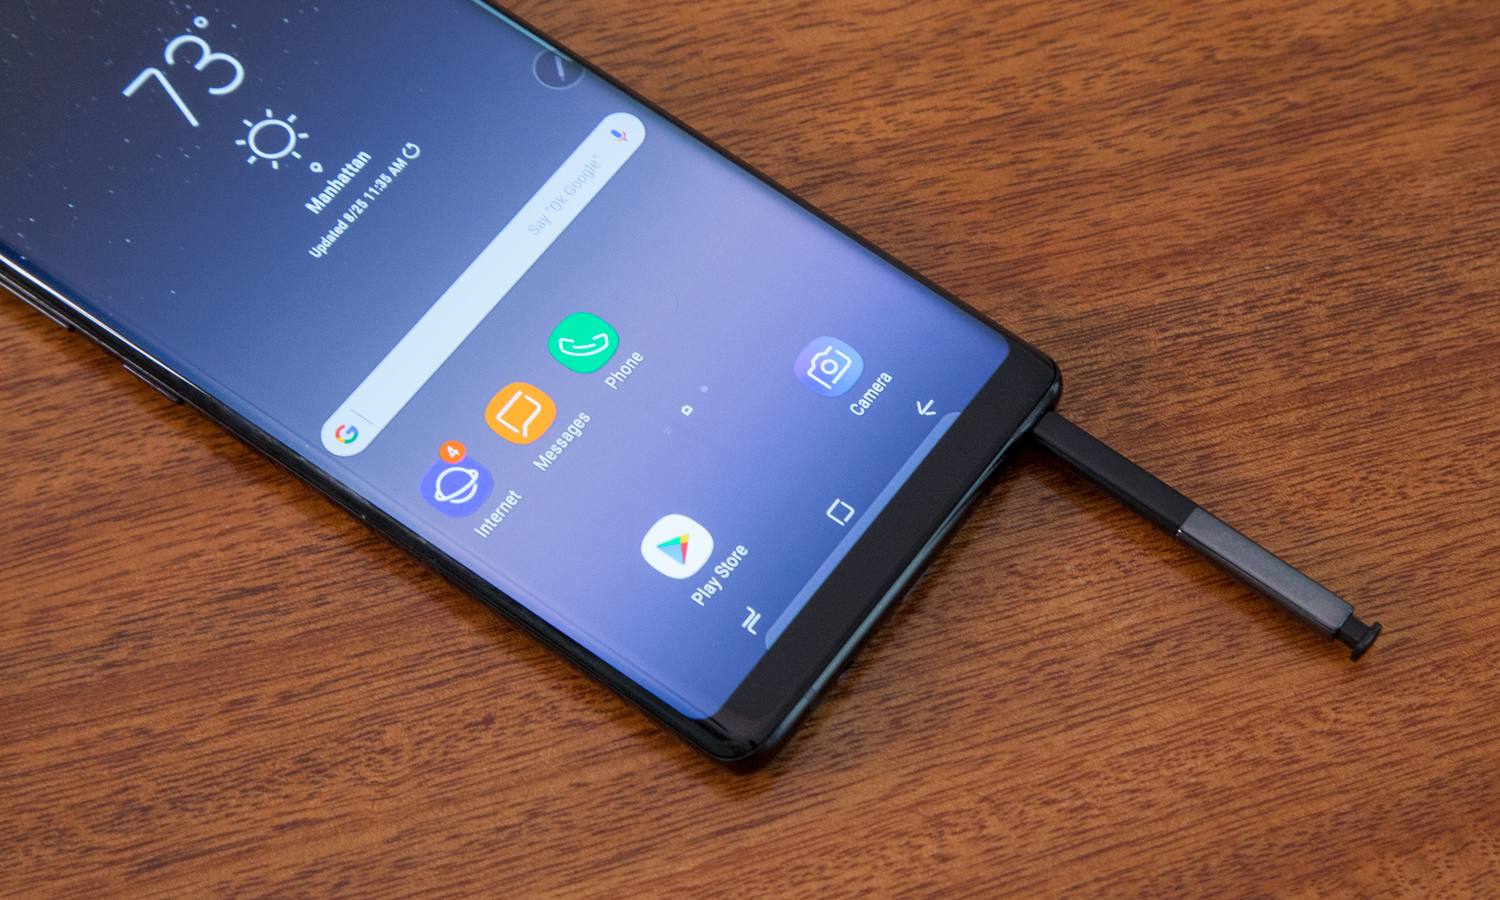 Samsung Galaxy Note 8 Review: Redemption Never Looked So Good